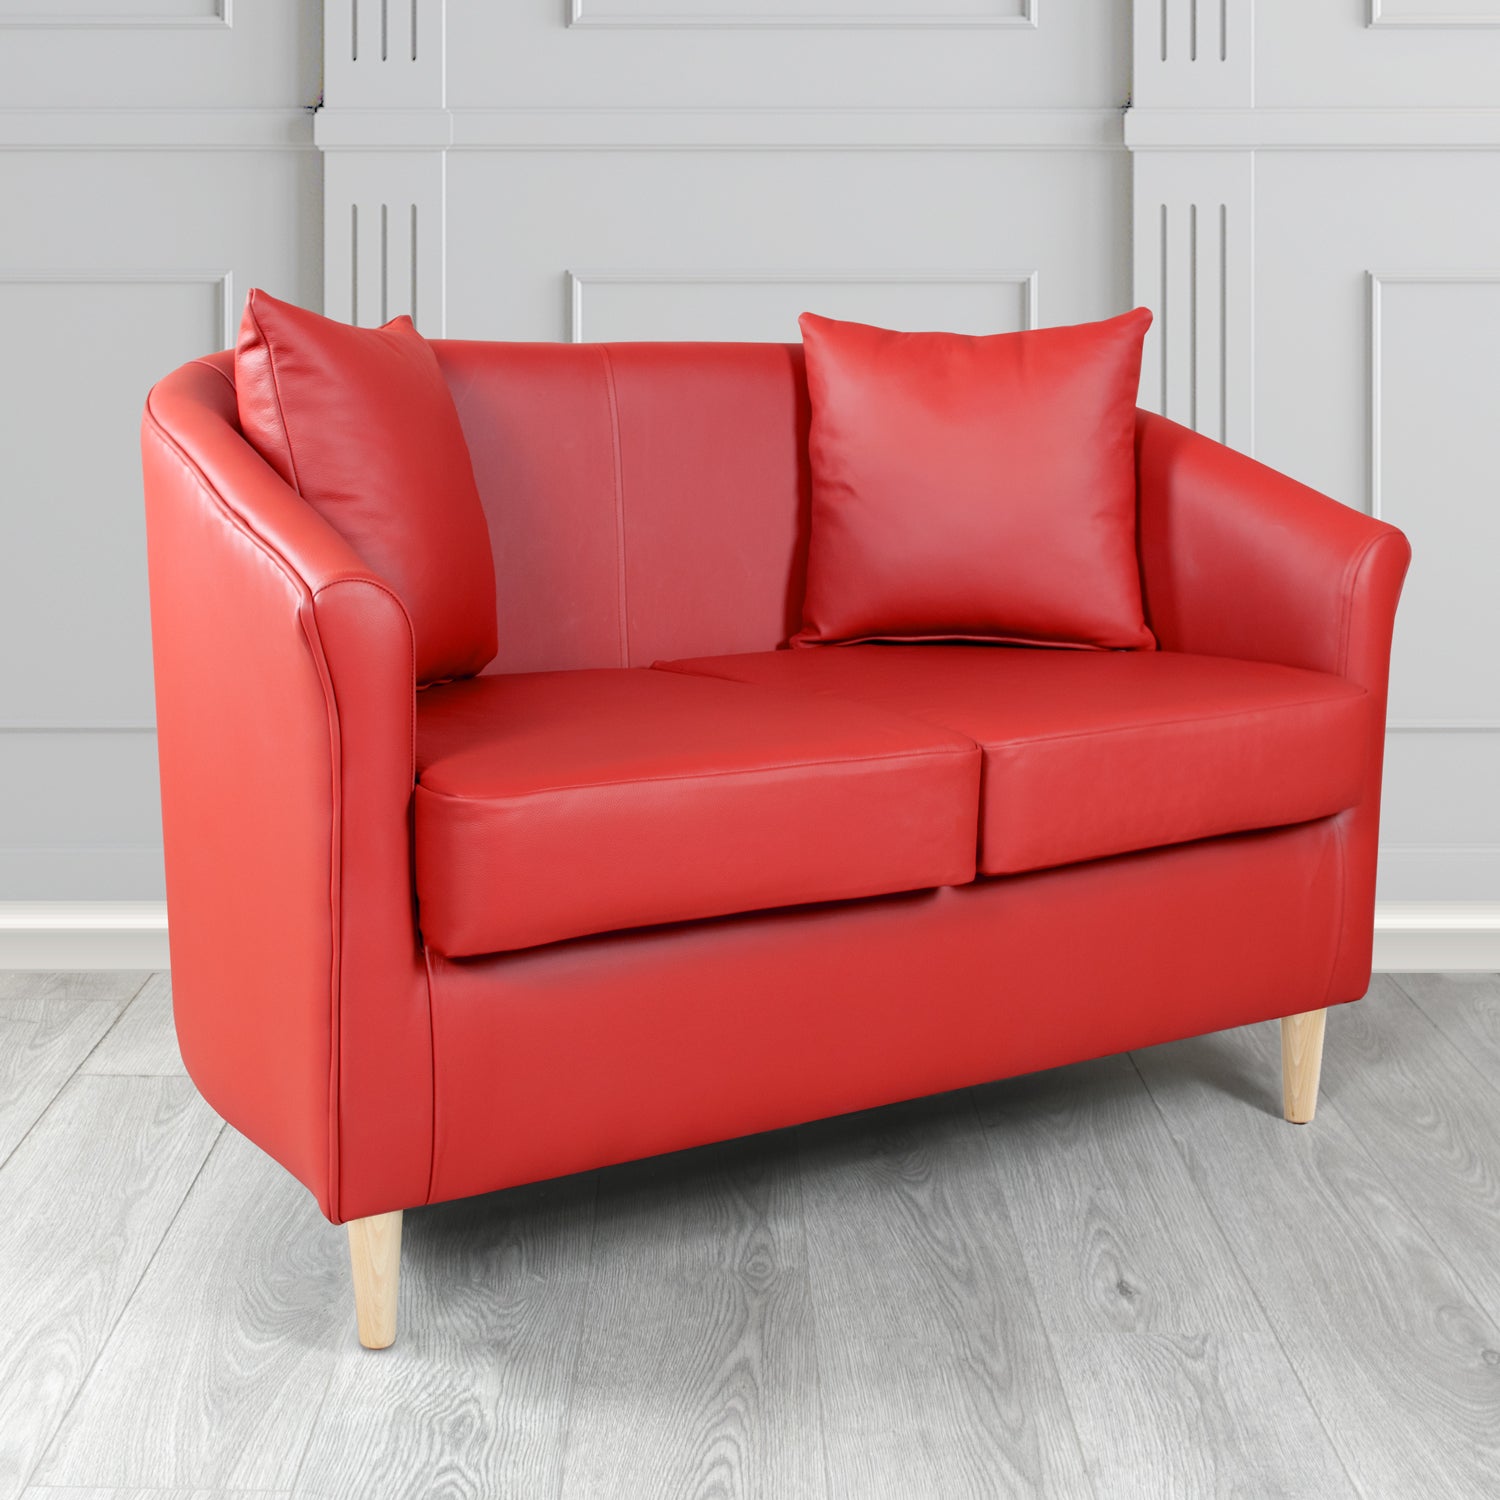 St Tropez Shelly Poppy Crib 5 Genuine Leather 2 Seater Tub Sofa with Scatter Cushions - The Tub Chair Shop